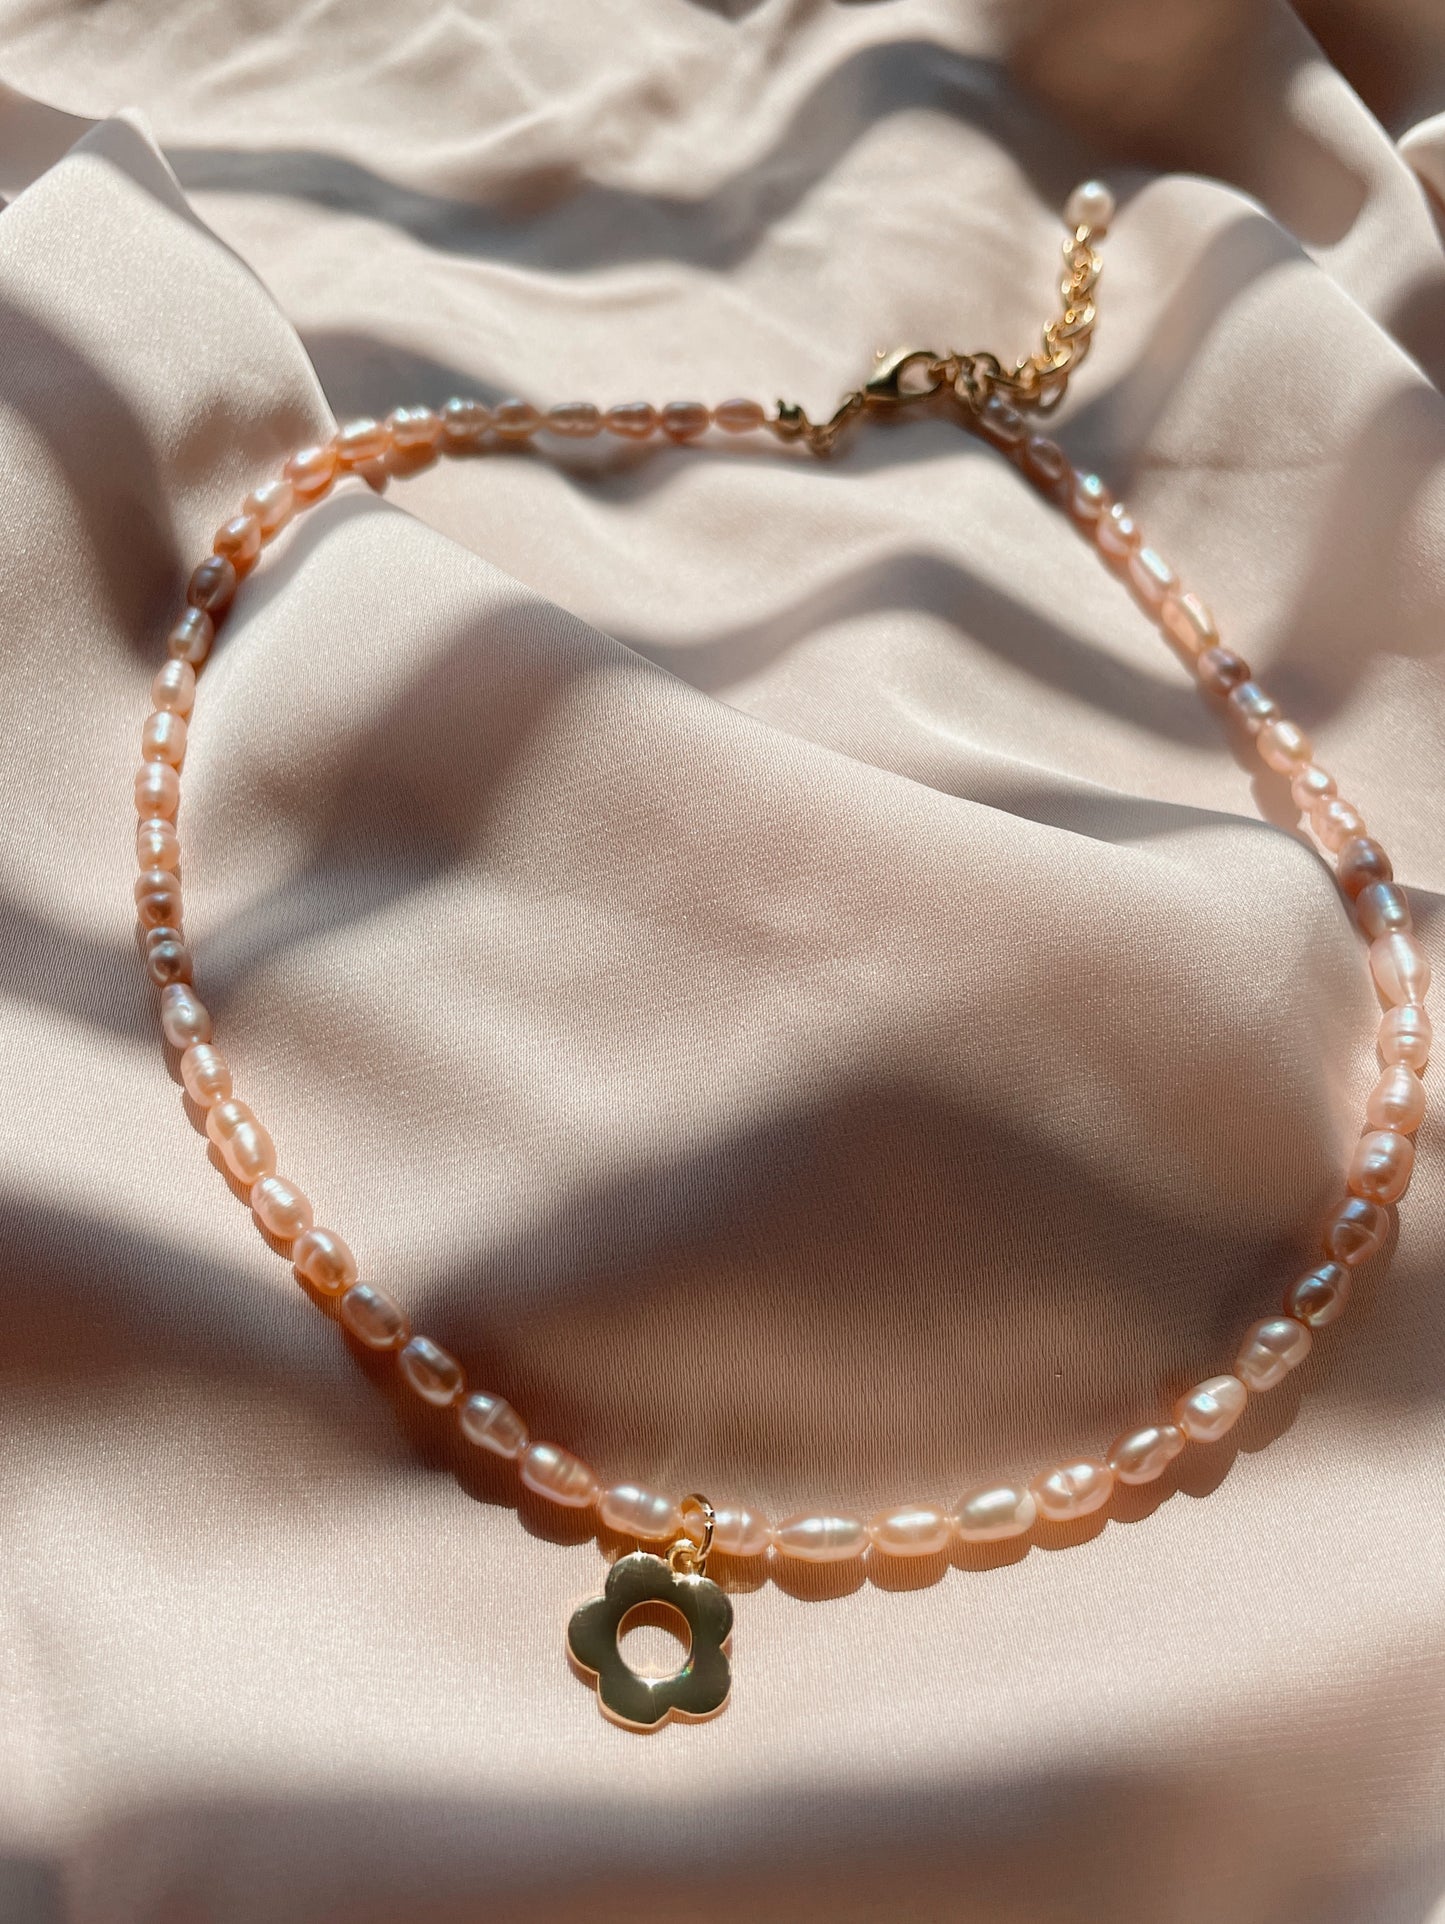 LEA - champagne pearl necklace choker with 14k gold flower charm